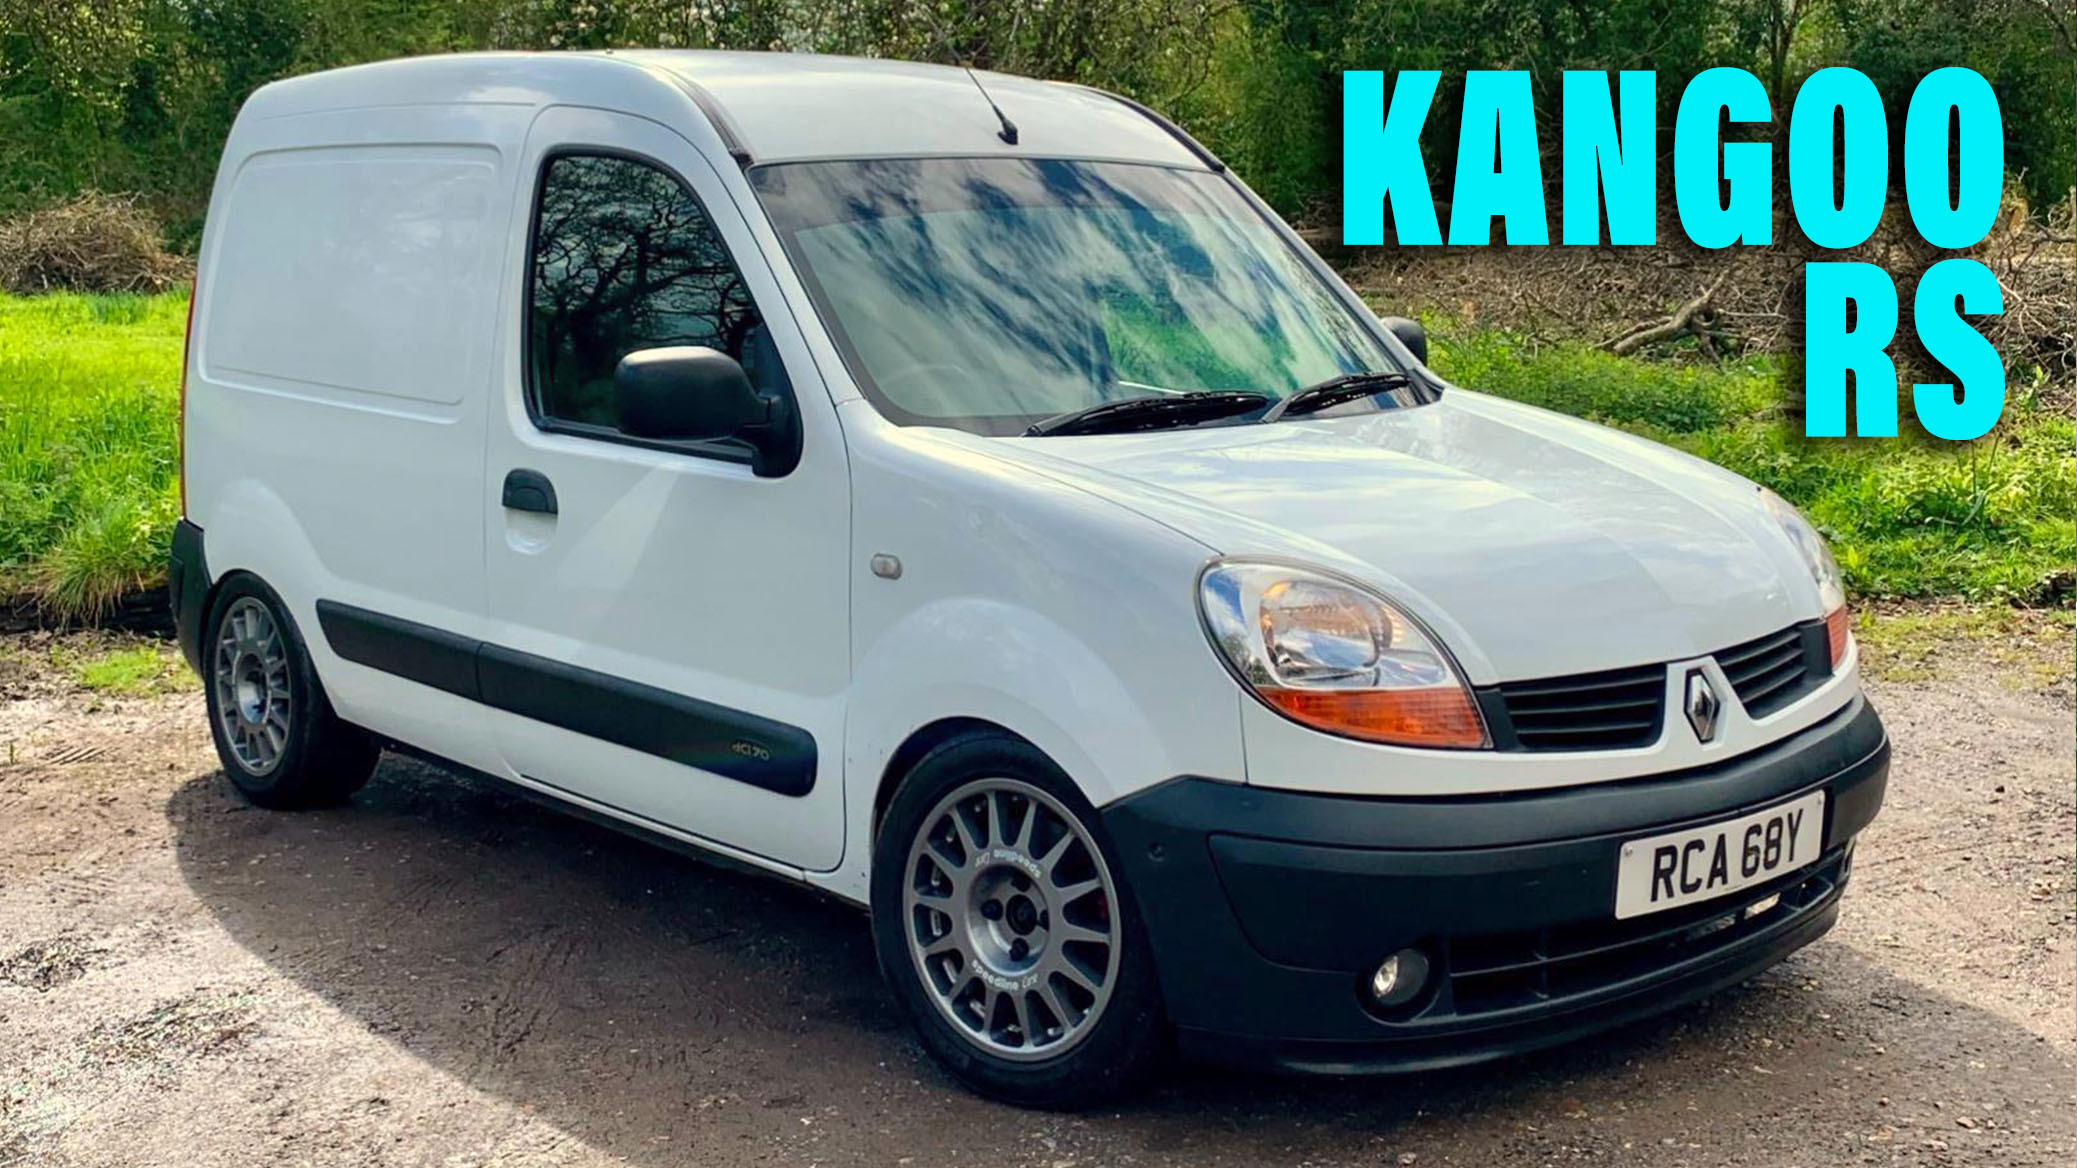 This Home-Brewed 200-HP Renaultsport Kangoo Is A Sleeper You Could